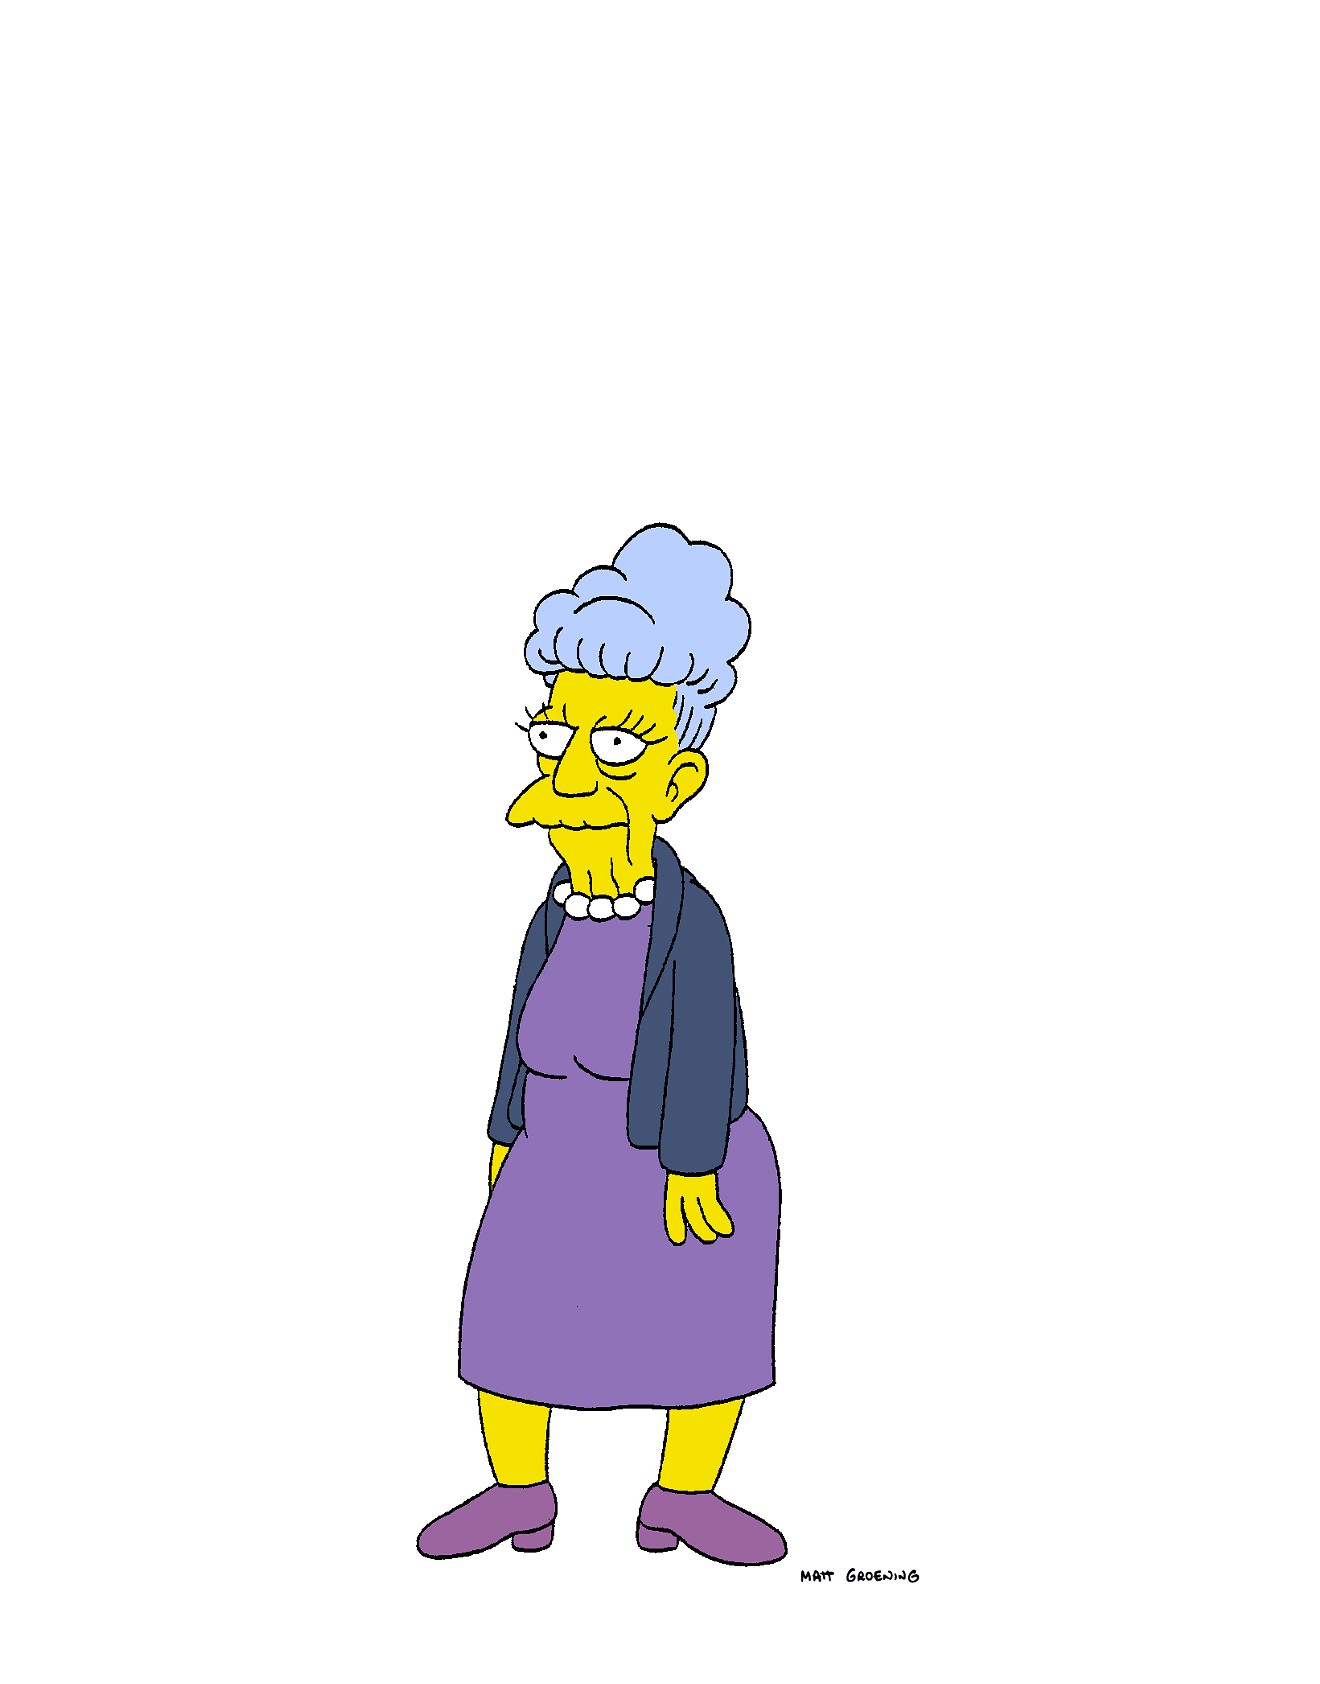 Principal Skinner's mom? One of the best worst moms ever.